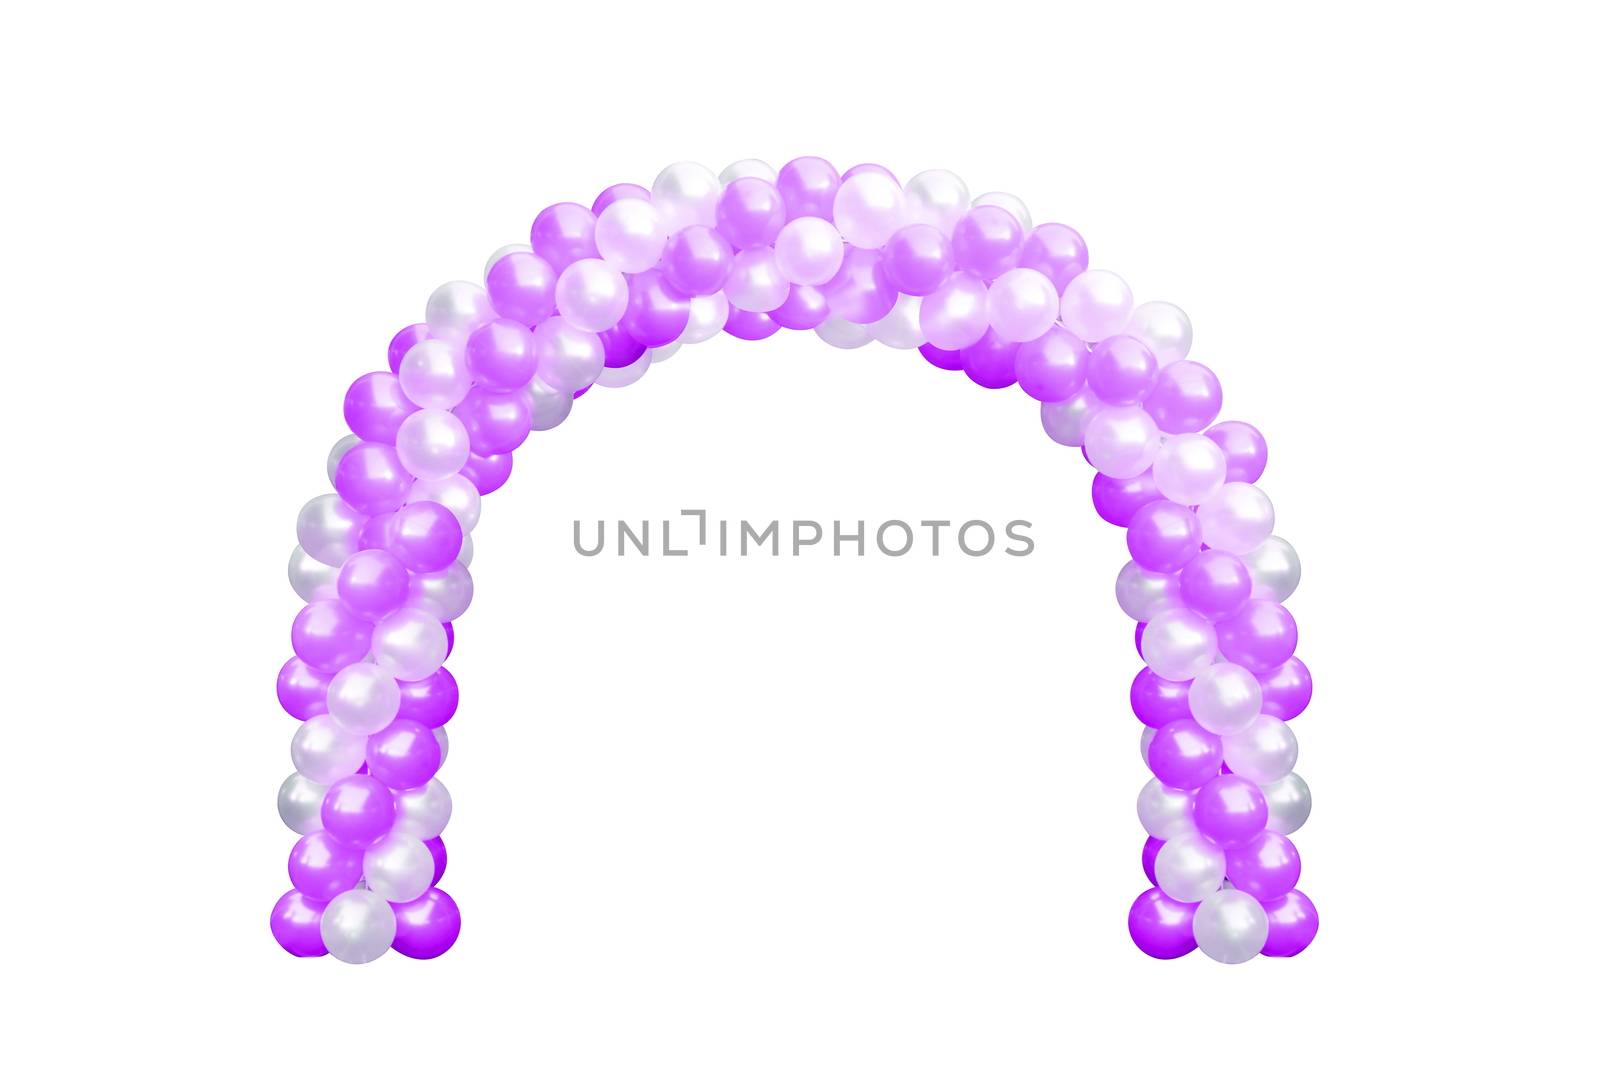 Balloon Archway door Purple Pink and white, Arches wedding, Balloon Festival design decoration elements with arch floral design isolated on white Background by cgdeaw